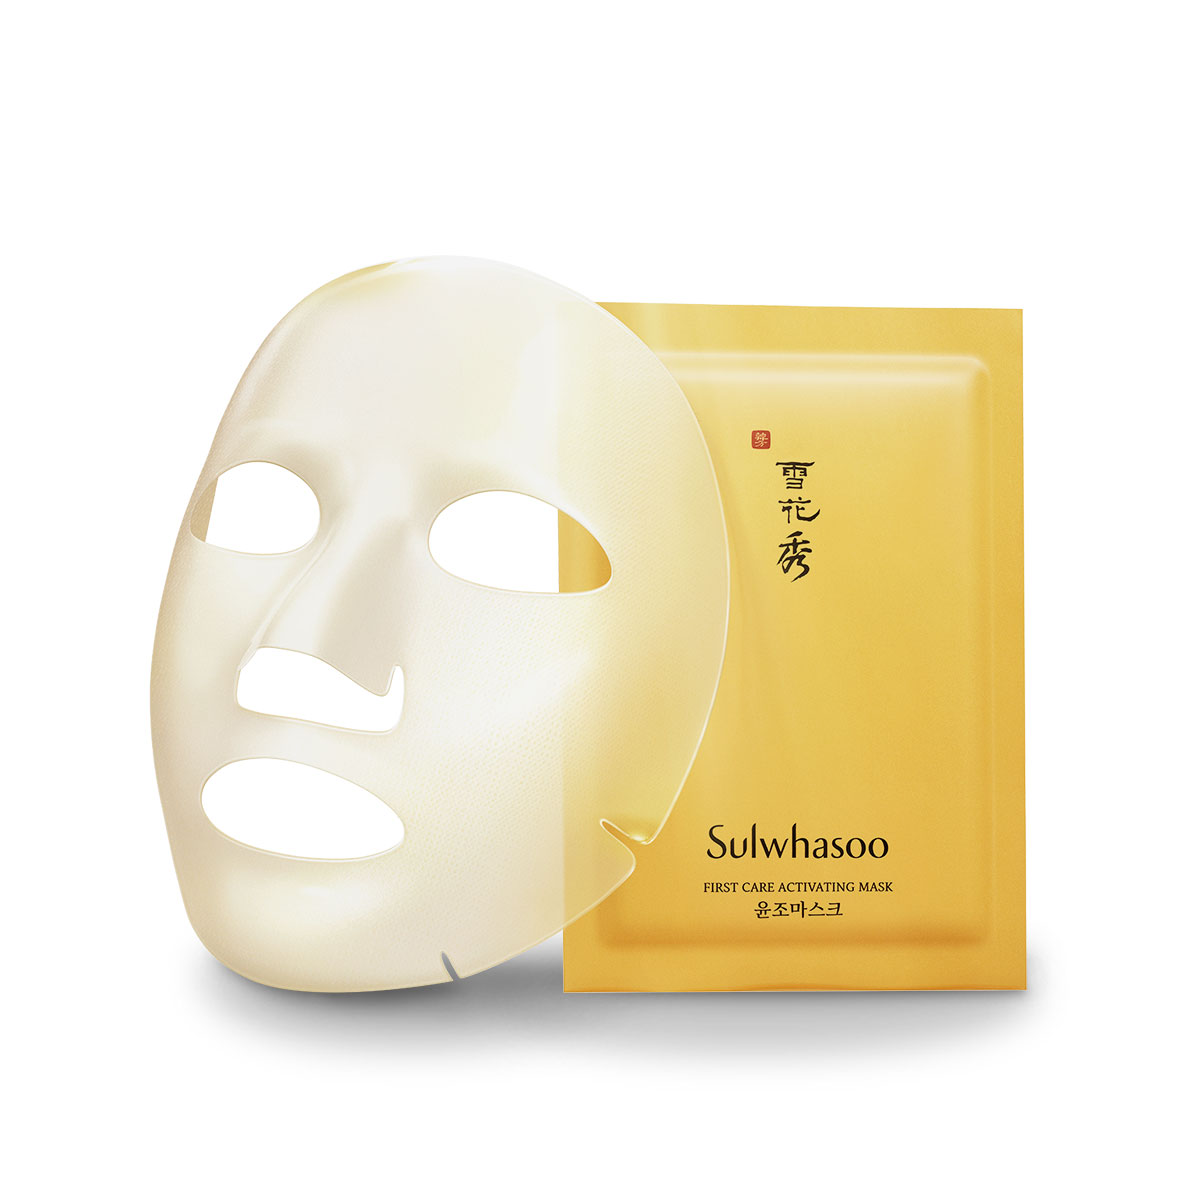 Sulwhasoo First Care Activating Mask (23g)